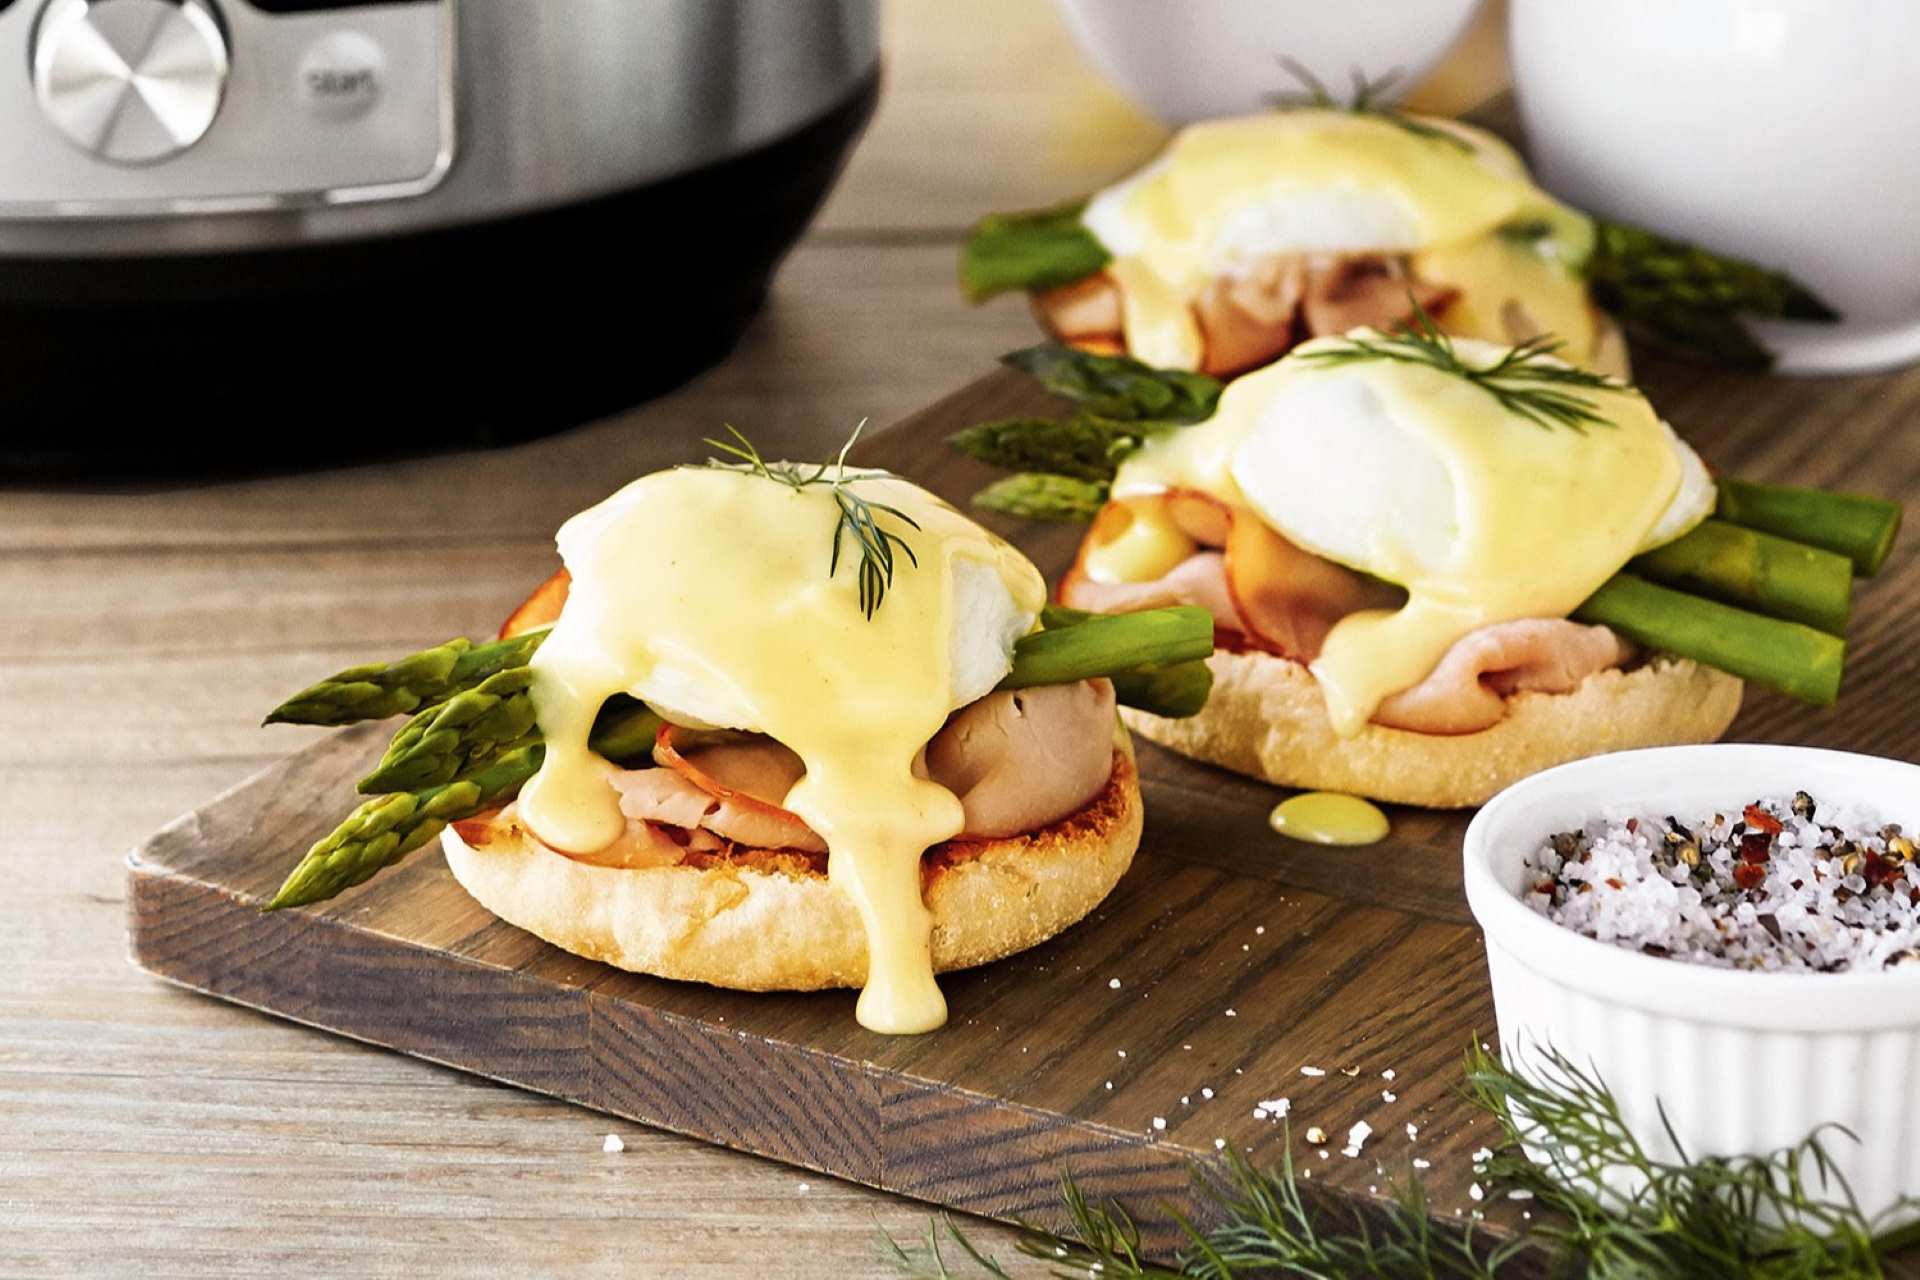 10 Easy Brunch Ideas To Spoil Mom This Mother’s Day